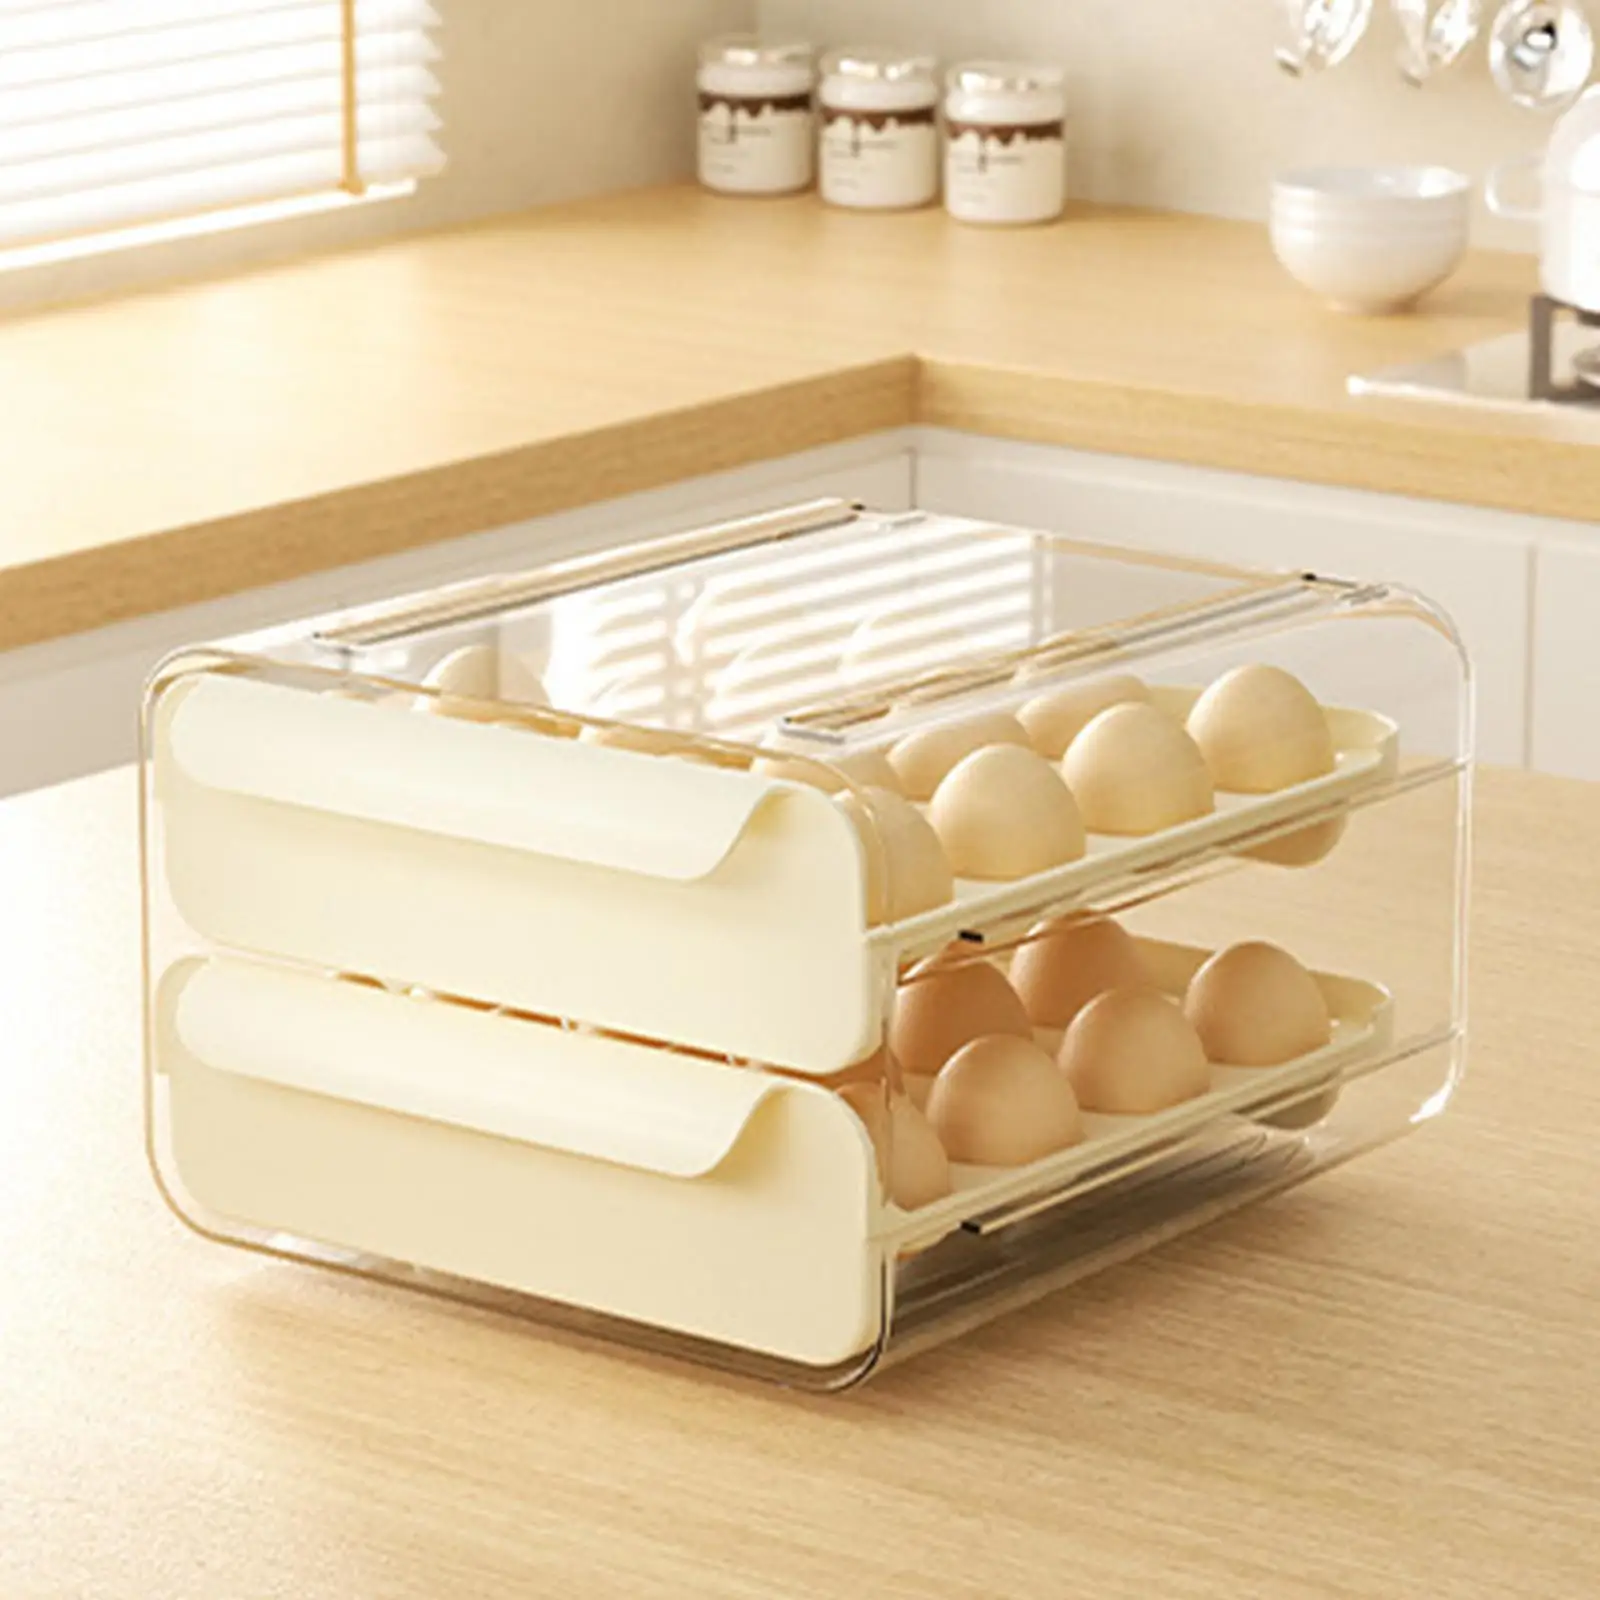 Eggs Organizer Drawer Large Capacity Double Layers Eggs Container Egg Holder for Pantry Cupboard Cabinet Countertop Refrigerator